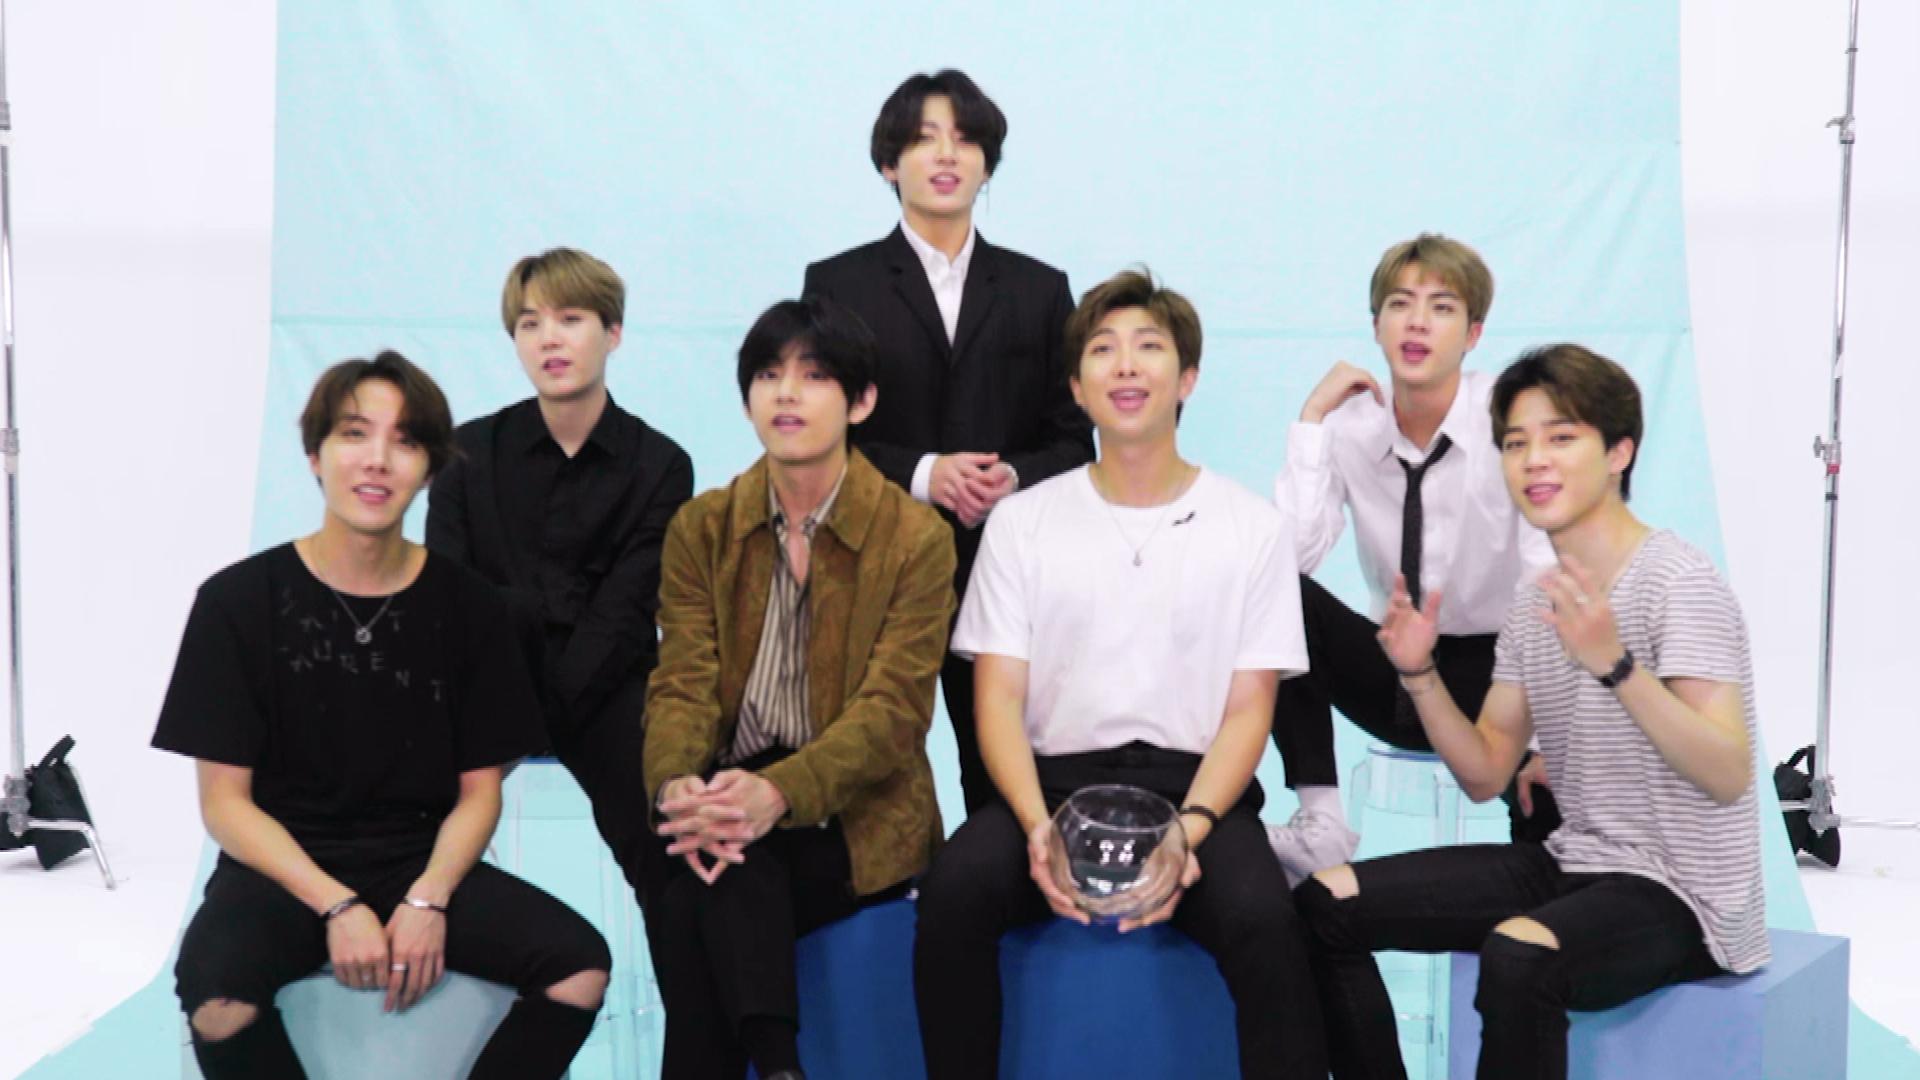 BTS on How ARMY Has 'Inspired' Them Amid 'Rough Year' Exclusive